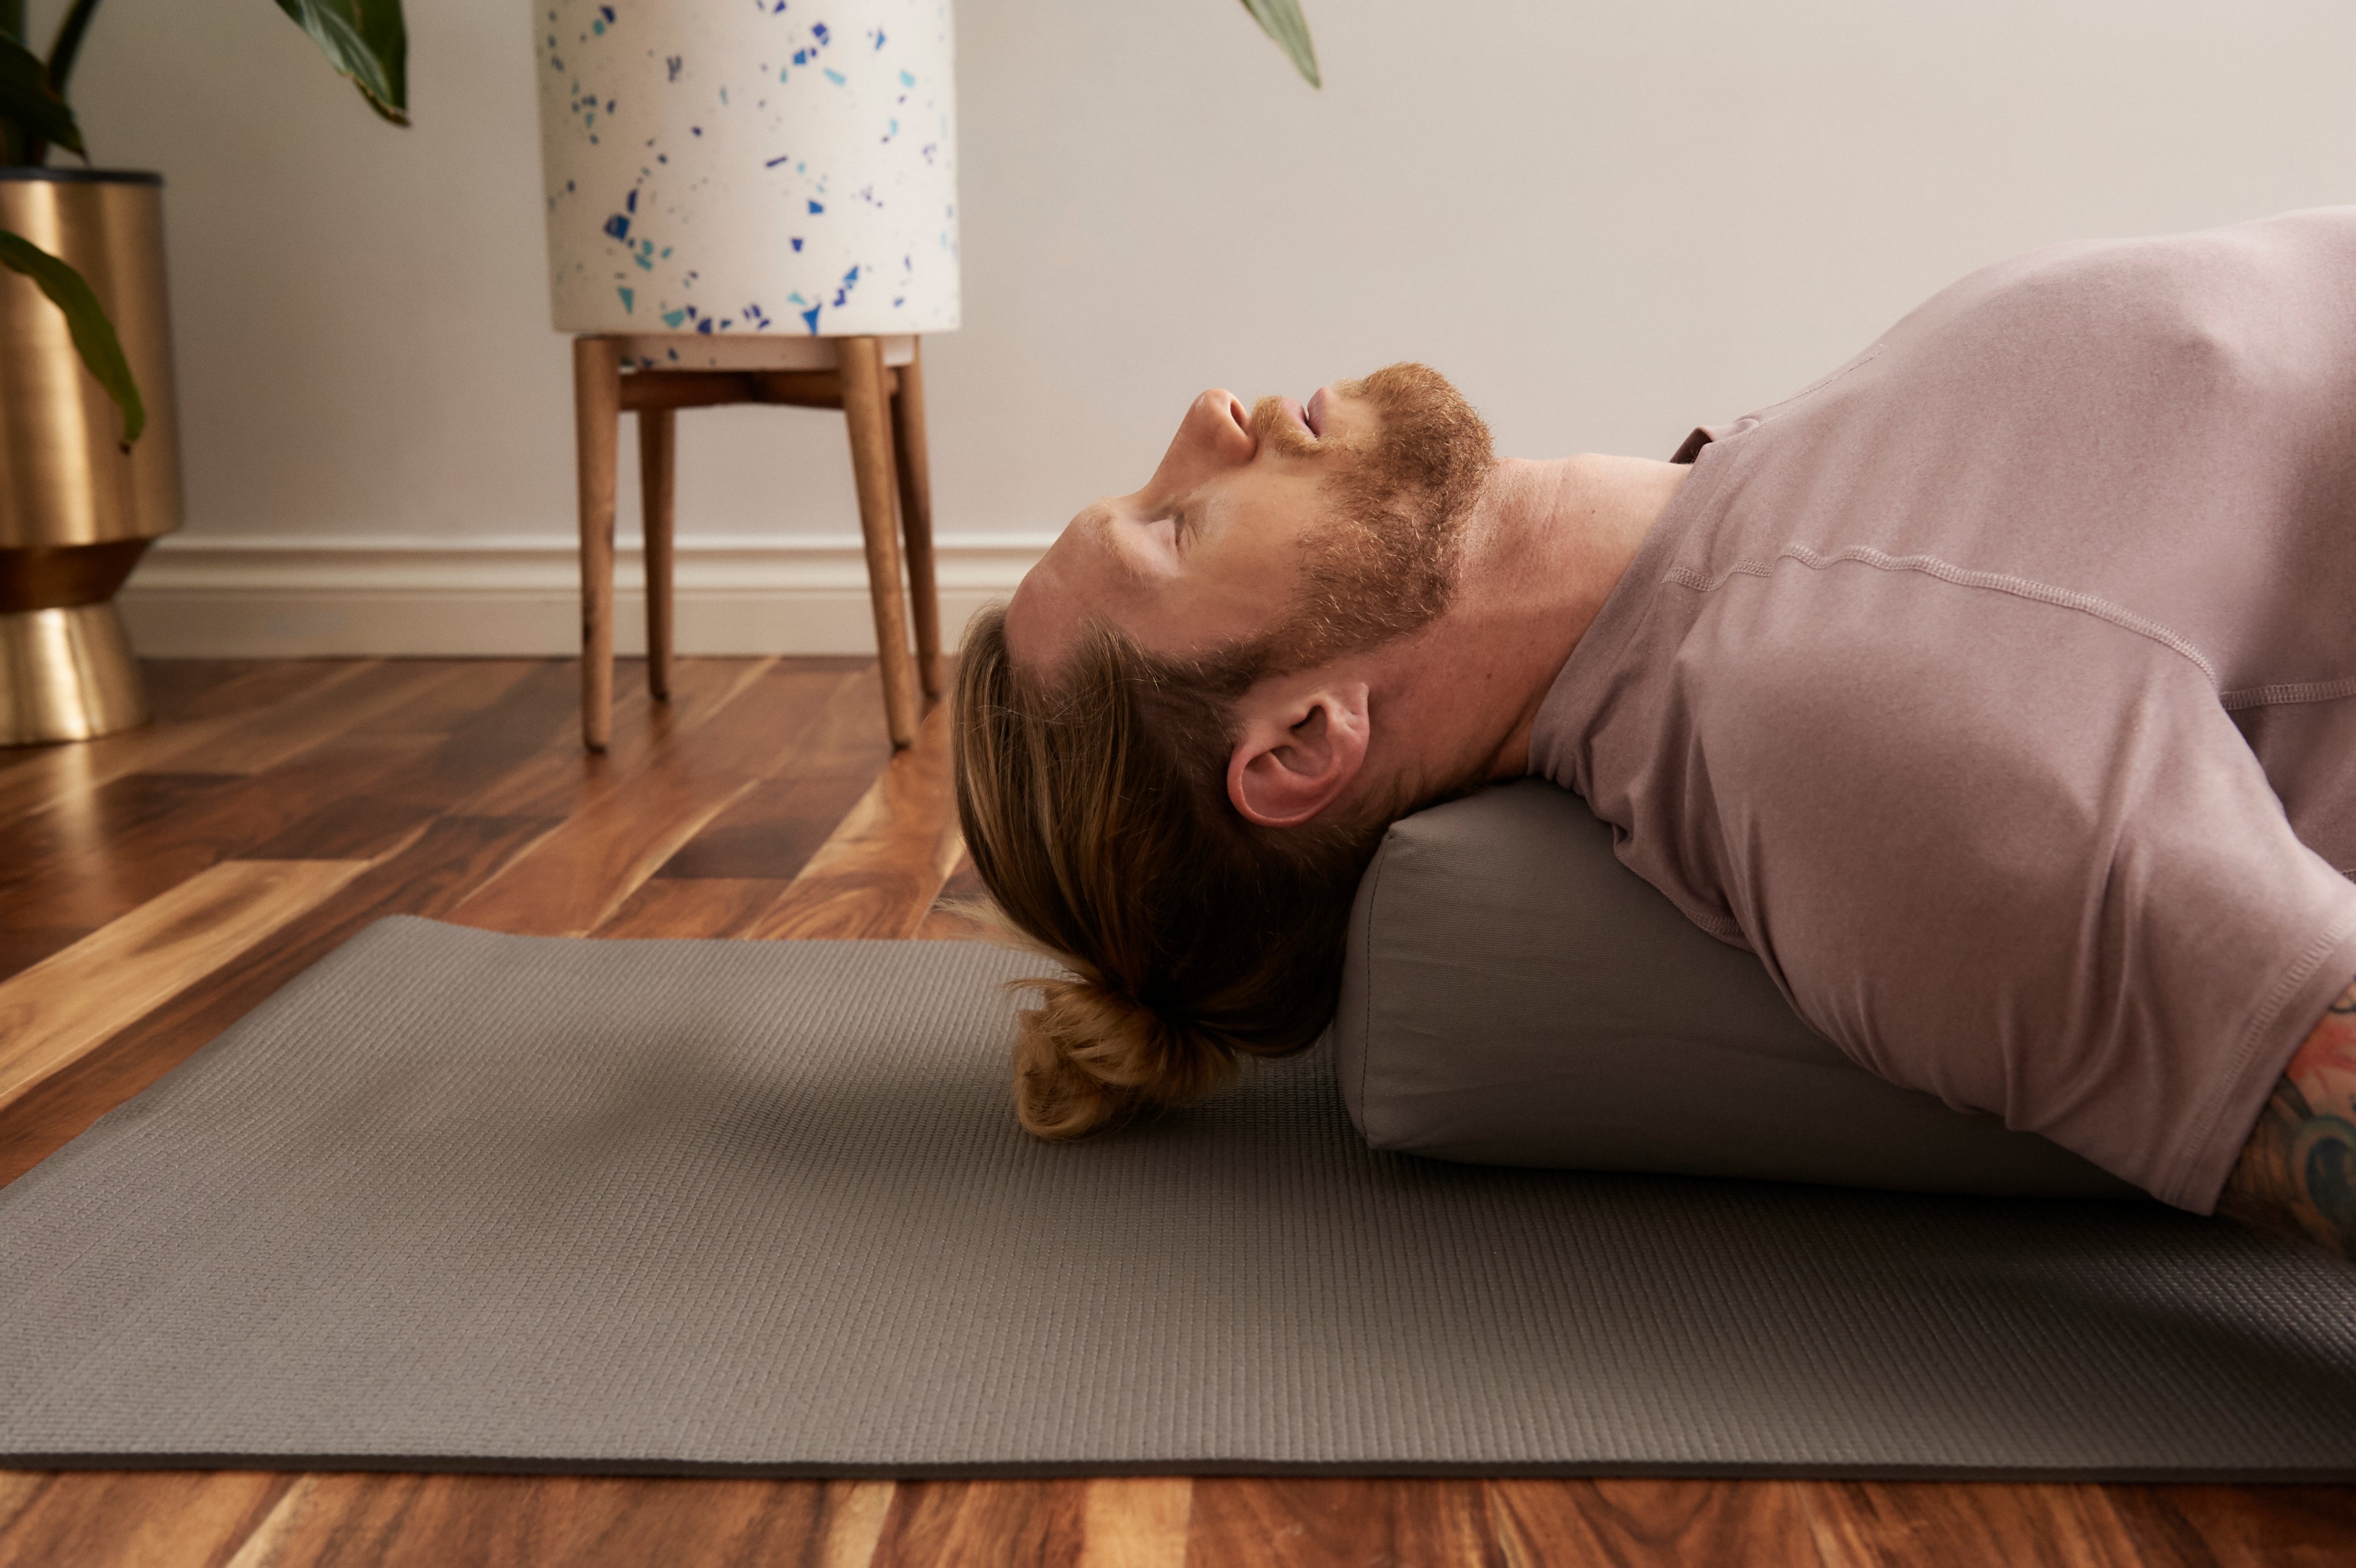 Yoga Bolster - Small - Mindful Works